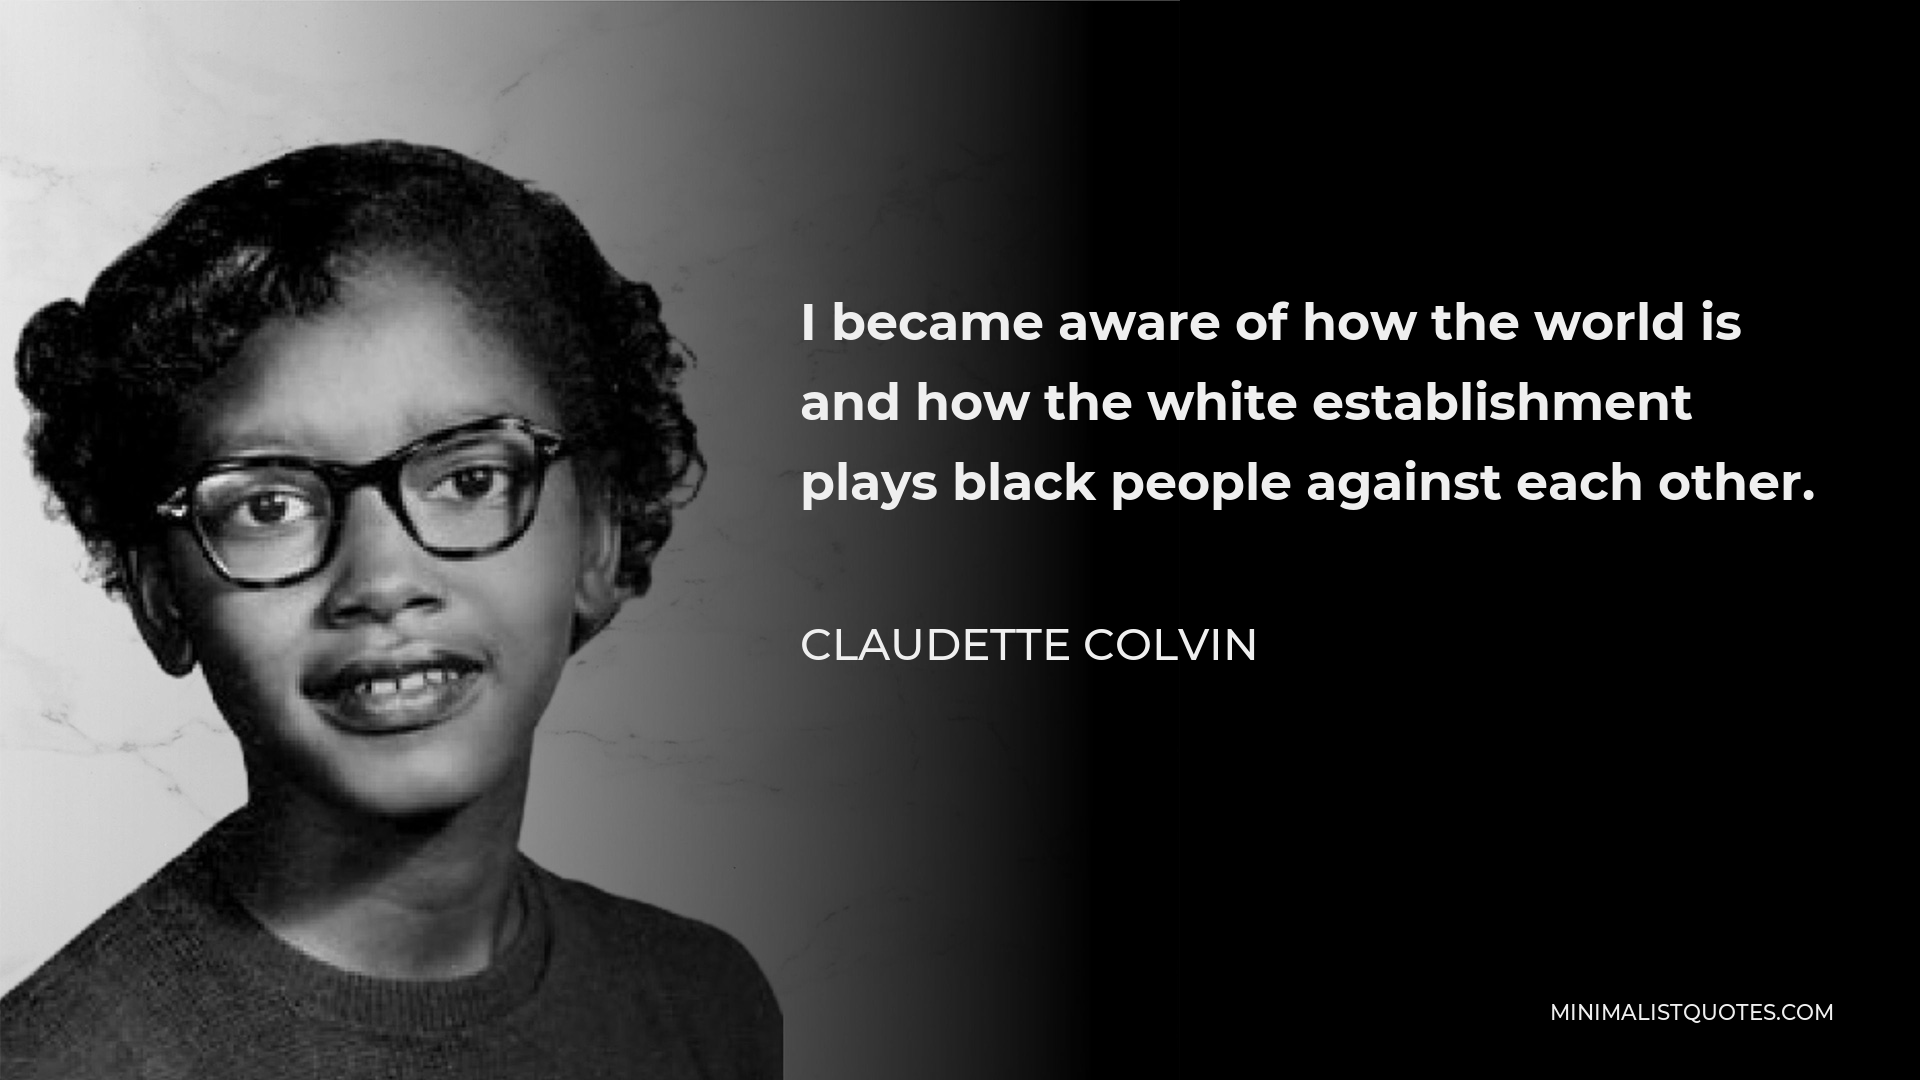 Claudette Colvin Quote - I became aware of how the world is and how the white establishment plays black people against each other.